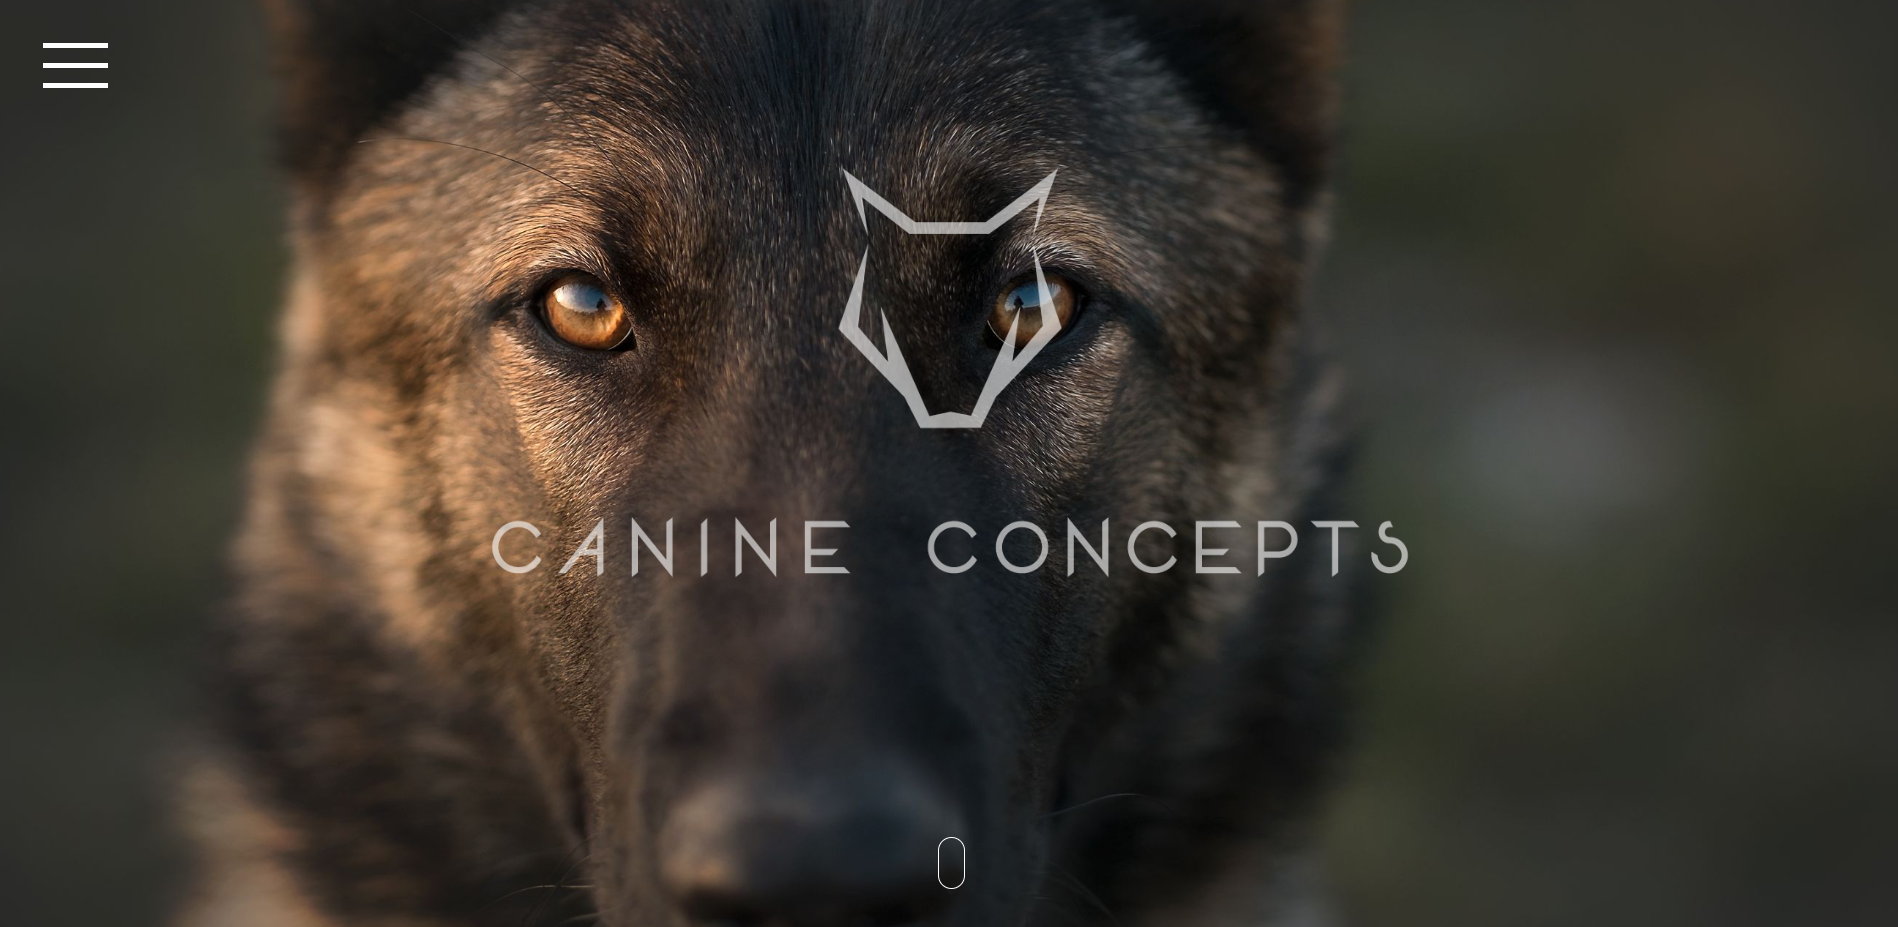 Canine Concepts